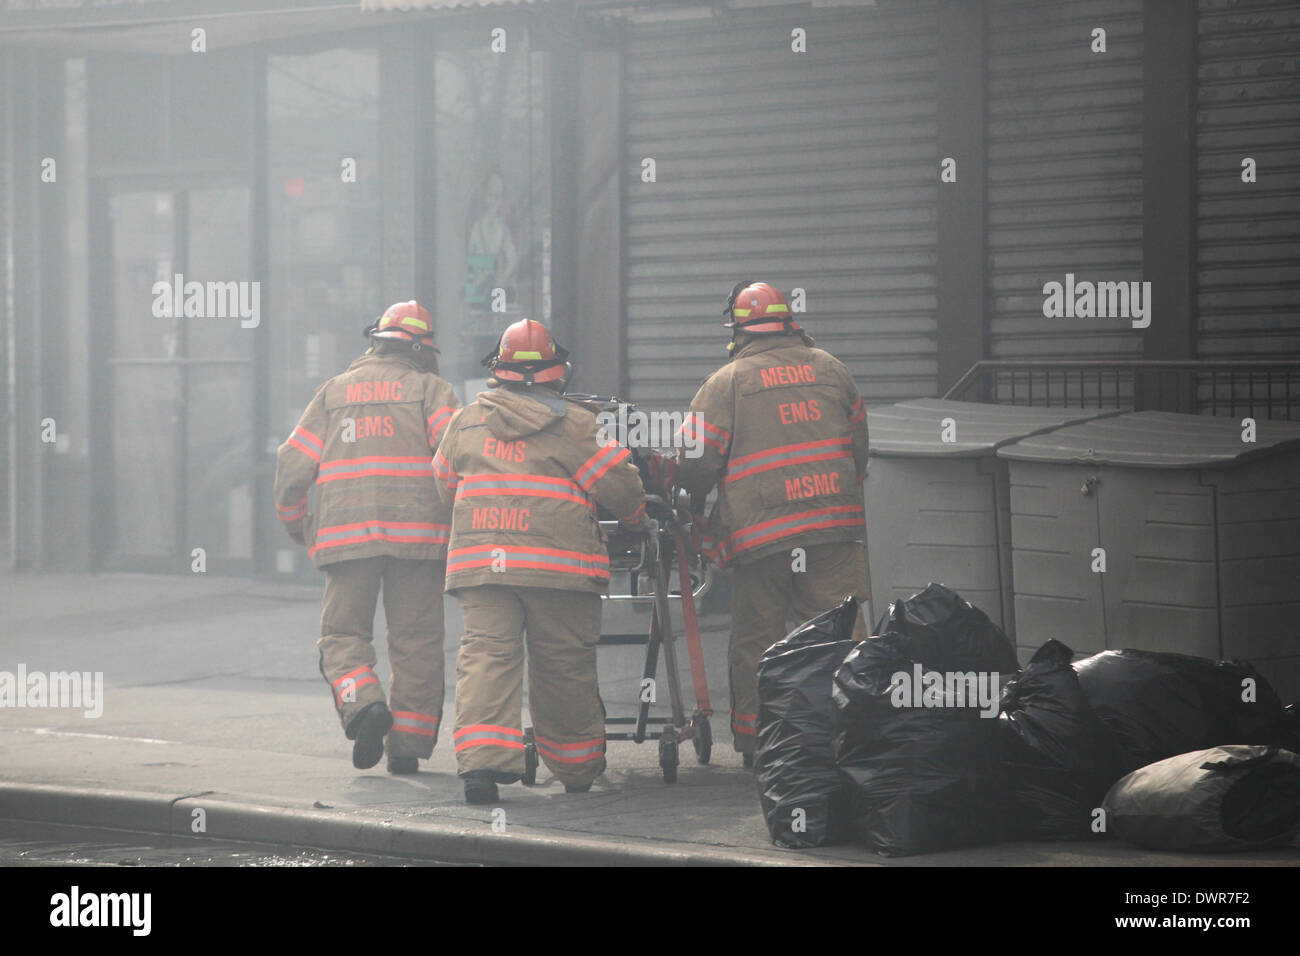 Harlem, New York City. 12 March 2014. EMS crew heads towards the four alarm fire on 116th Street in Harlem Credit:  Cal Vornberger/Alamy Live News Stock Photo